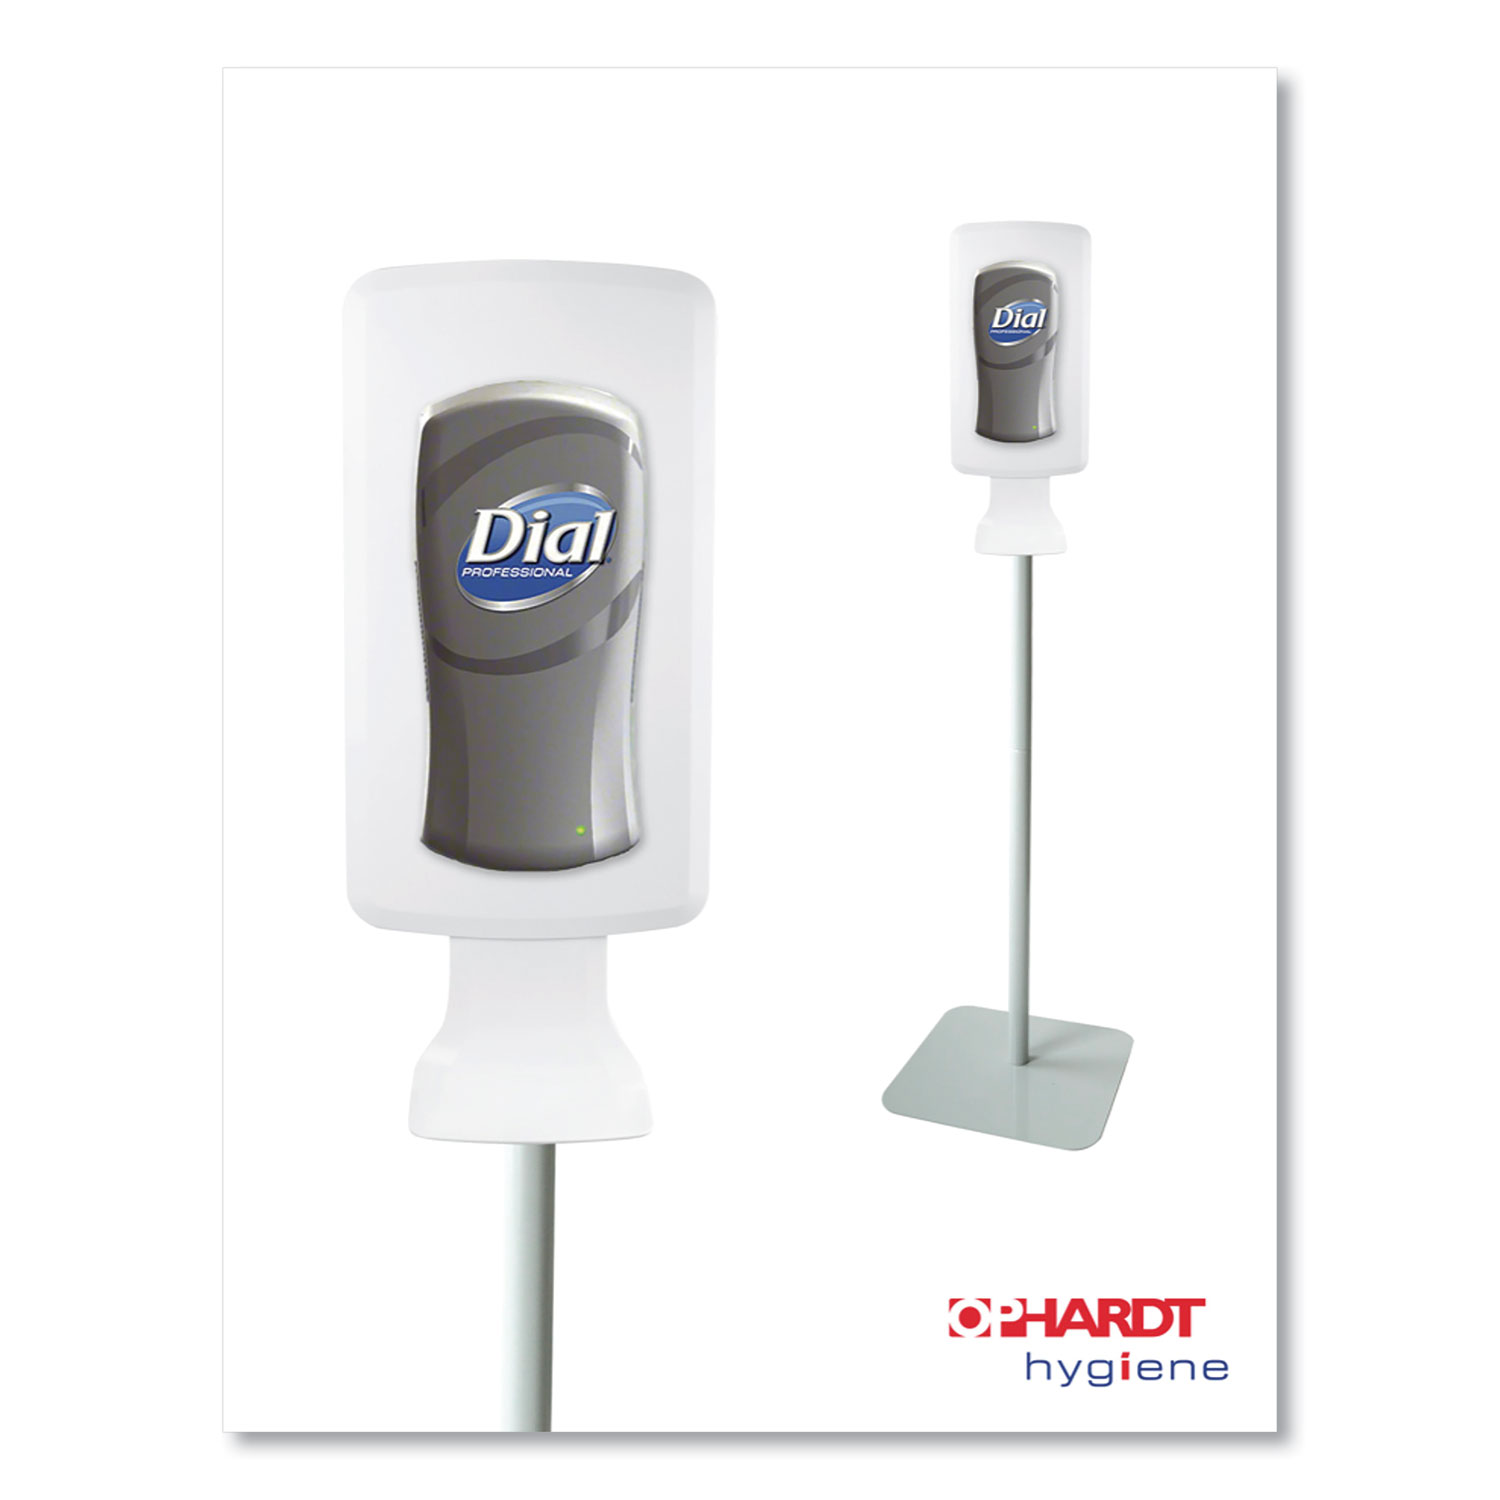  Dial 09495EA FIT Touch Free Dispenser Floor Stand, 15.7 x 15.7 x 58.3, White (DIA09495EA) 